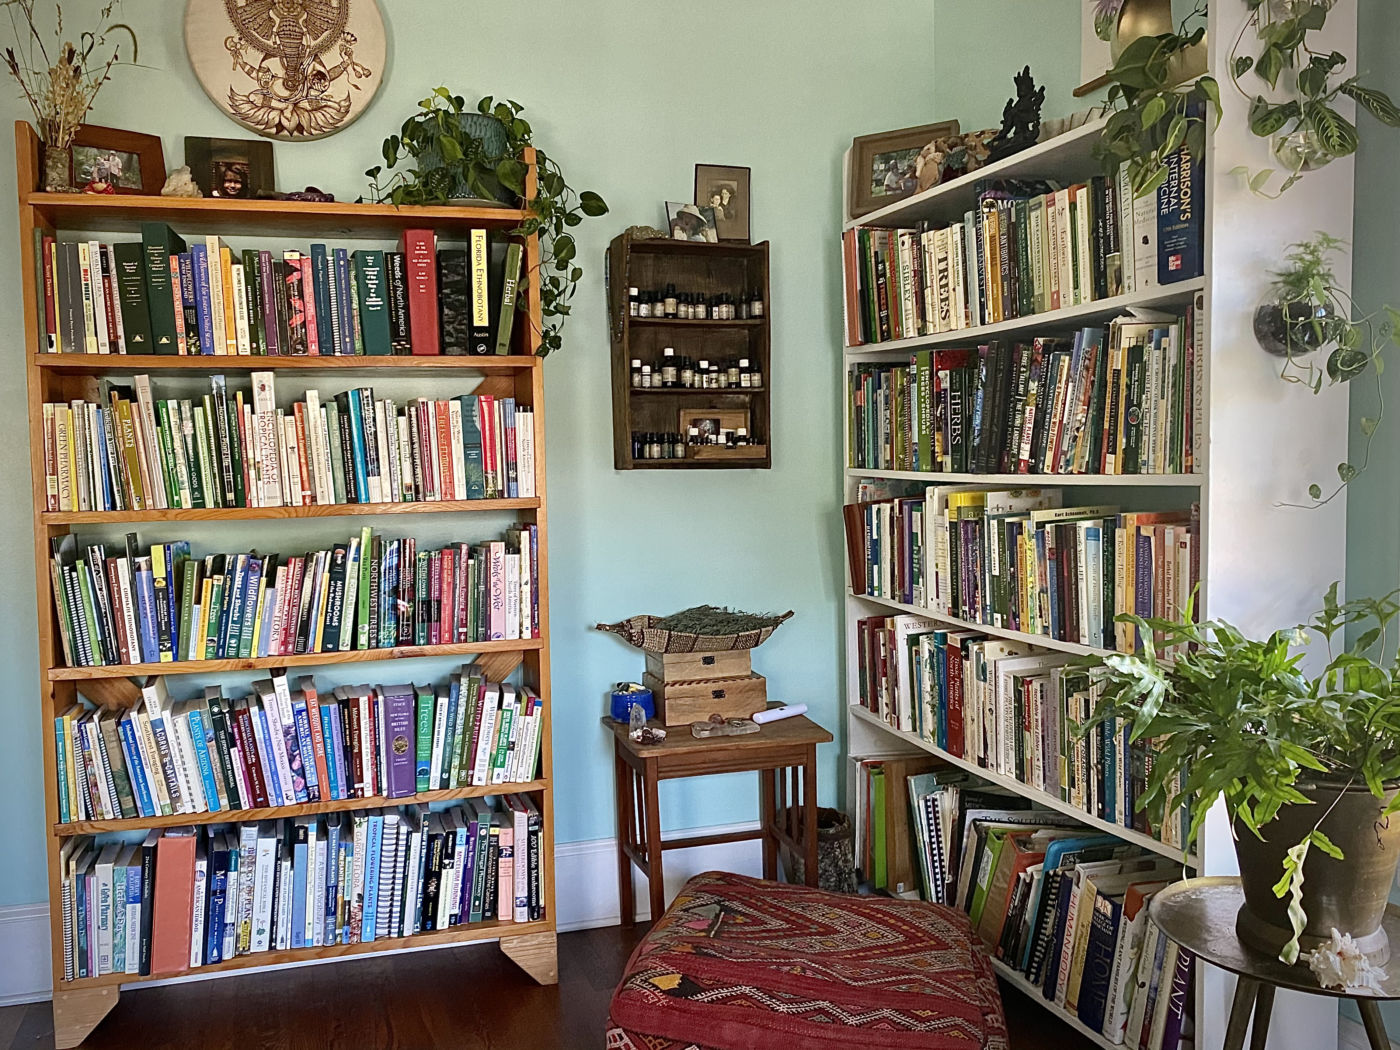 Two wooden bookcases full of the best herbal medicine books for herbalists, in a light blue room with lots of plants.